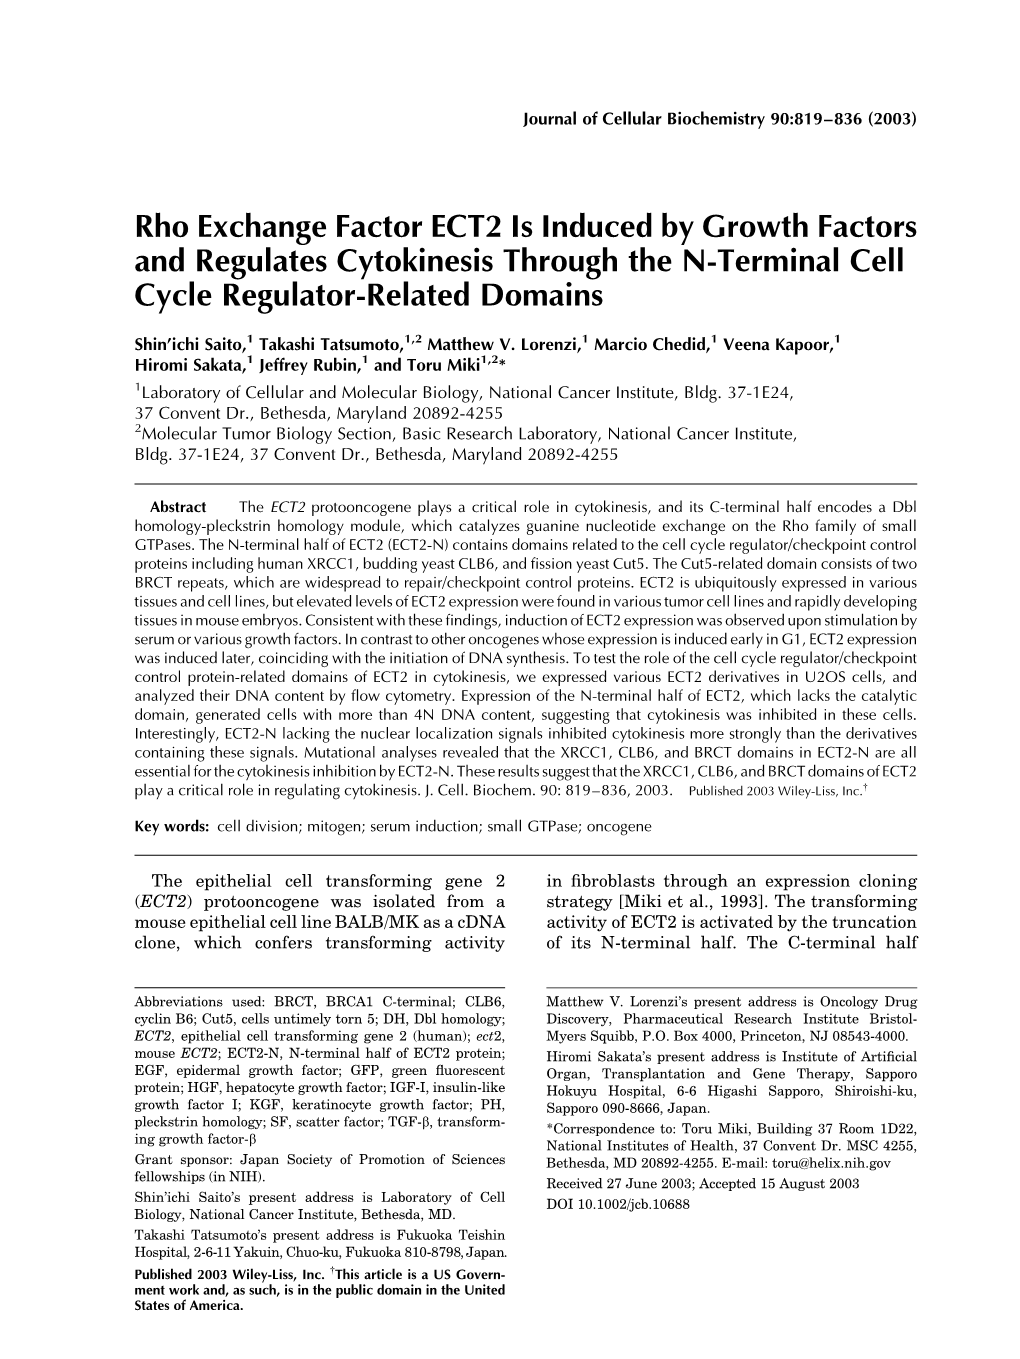 Rho Exchange Factor ECT2 Is Induced by Growth Factors and Regulates Cytokinesis Through the N-Terminal Cell Cycle Regulator-Related Domains